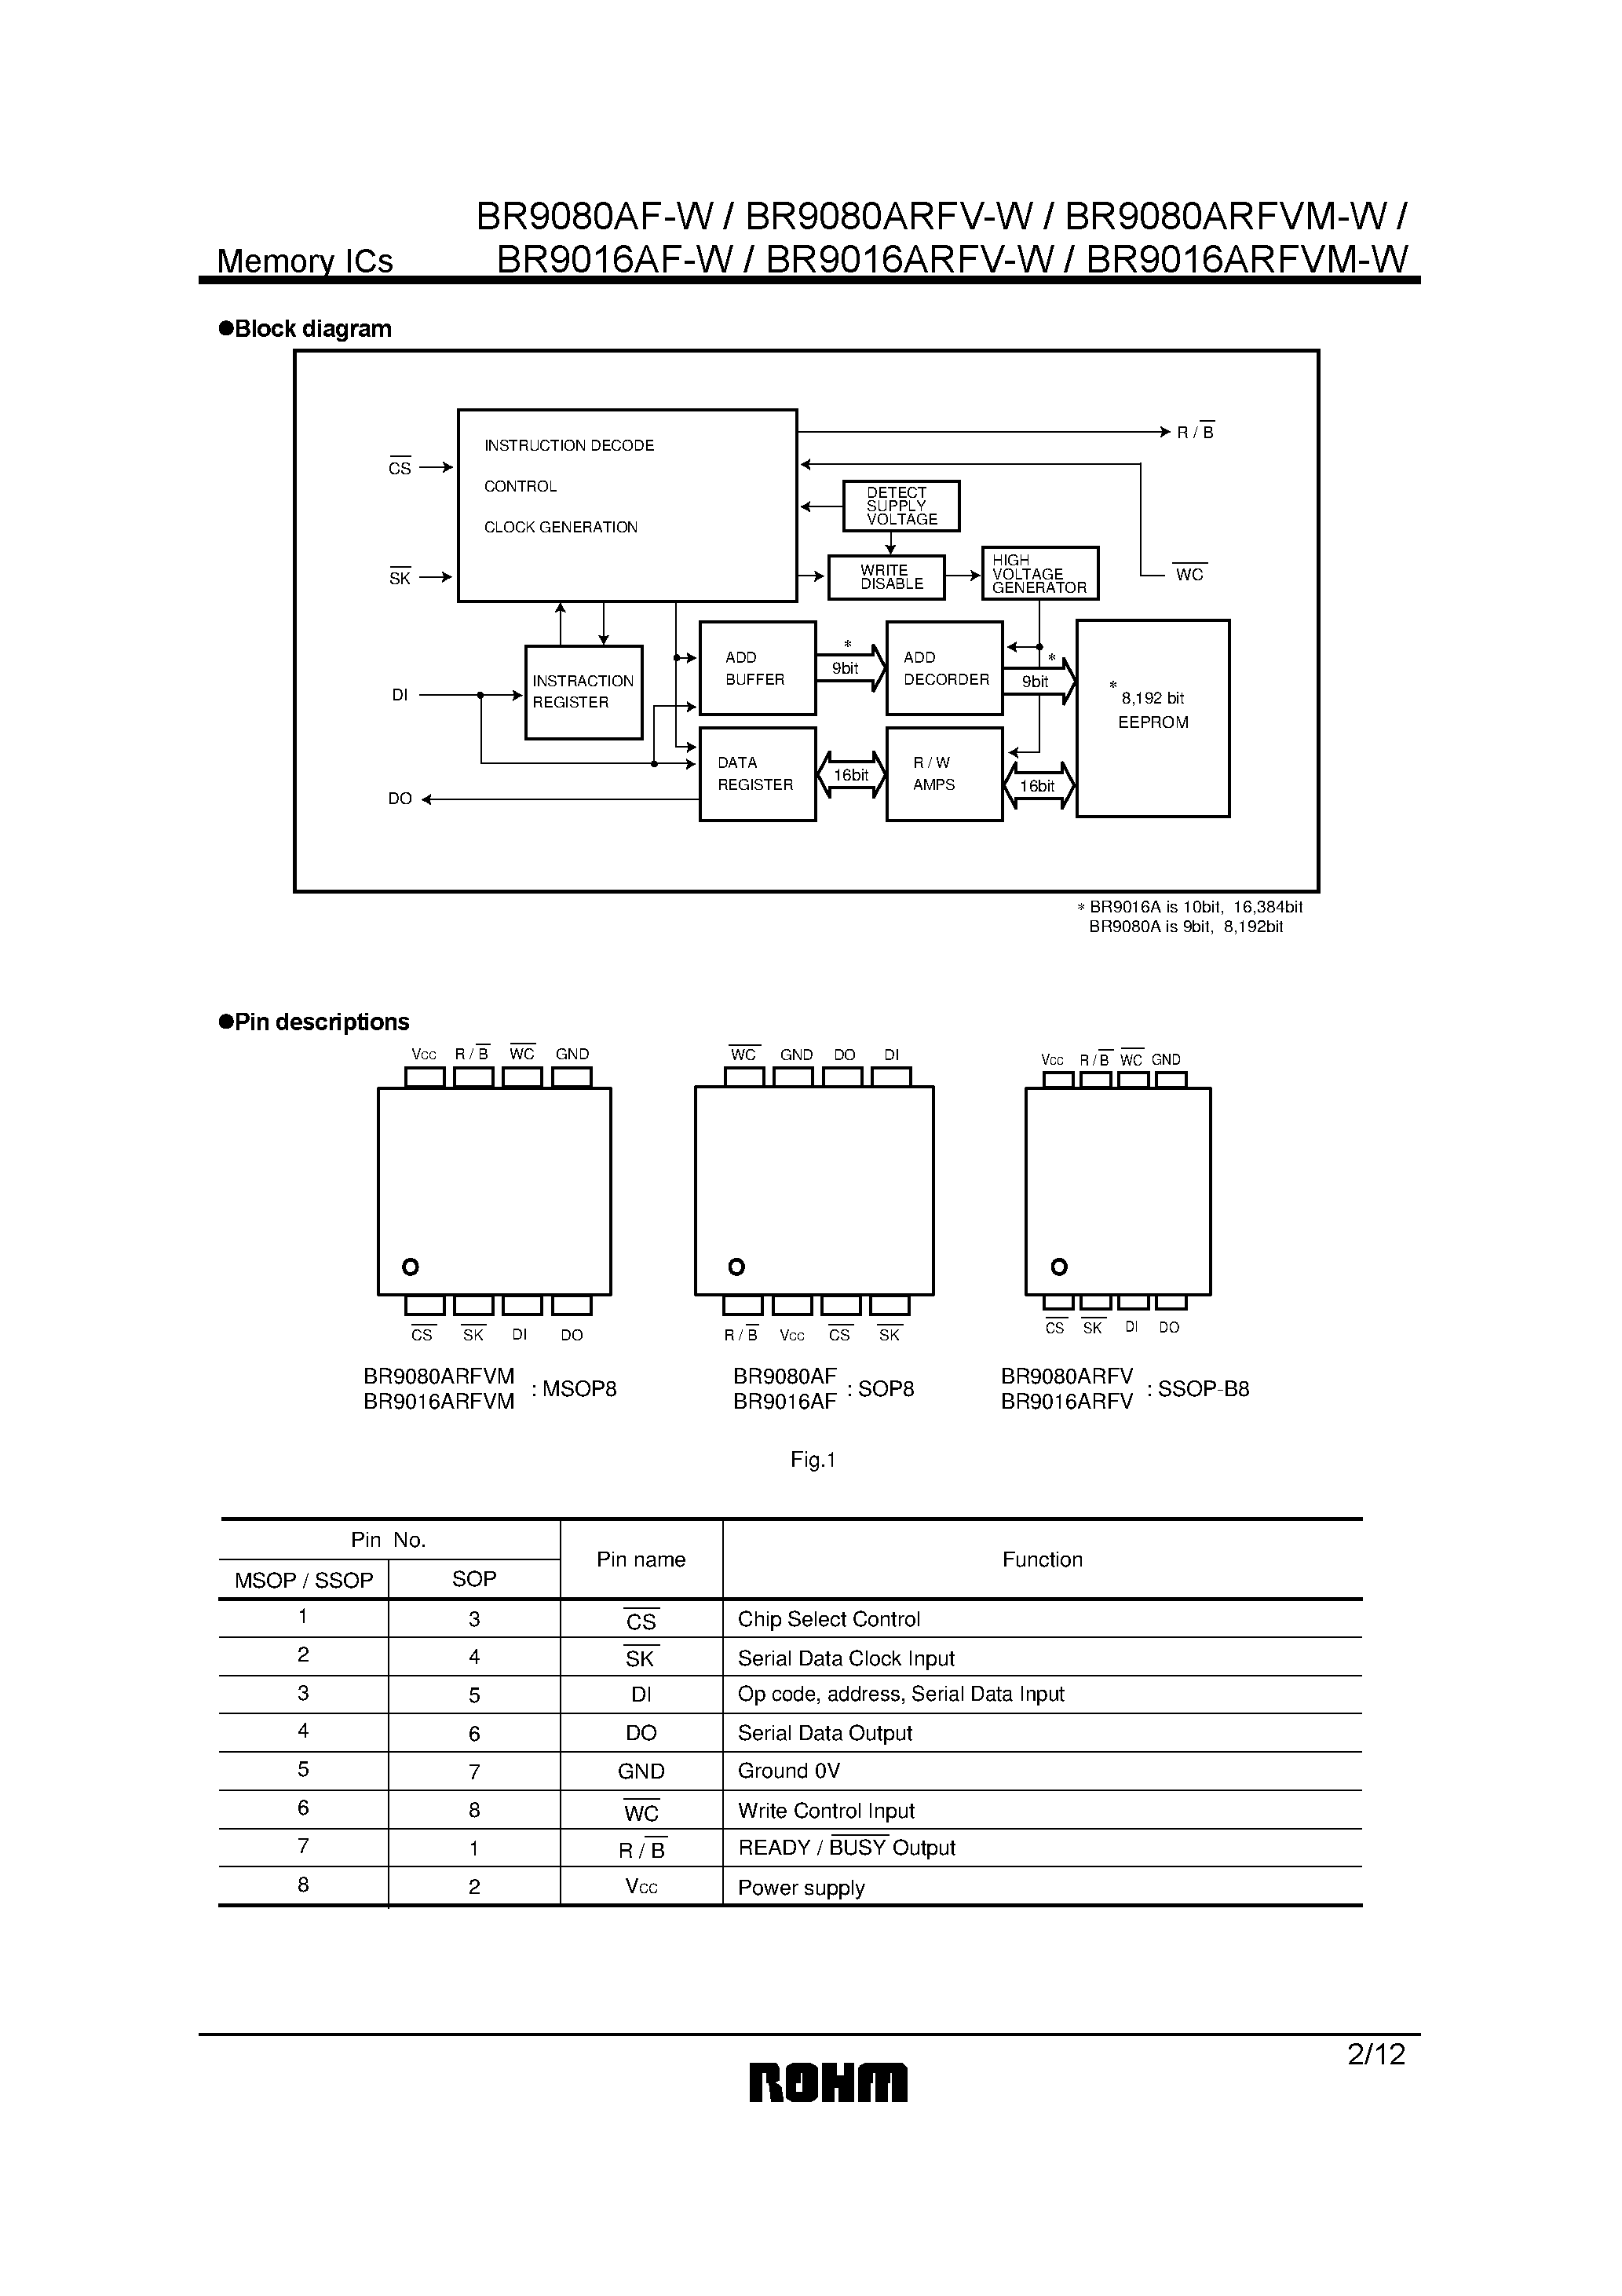 Datasheet BR9016ARFVM-W - 8k/ 16k bit EEPROMs for direct connection to serial ports page 2